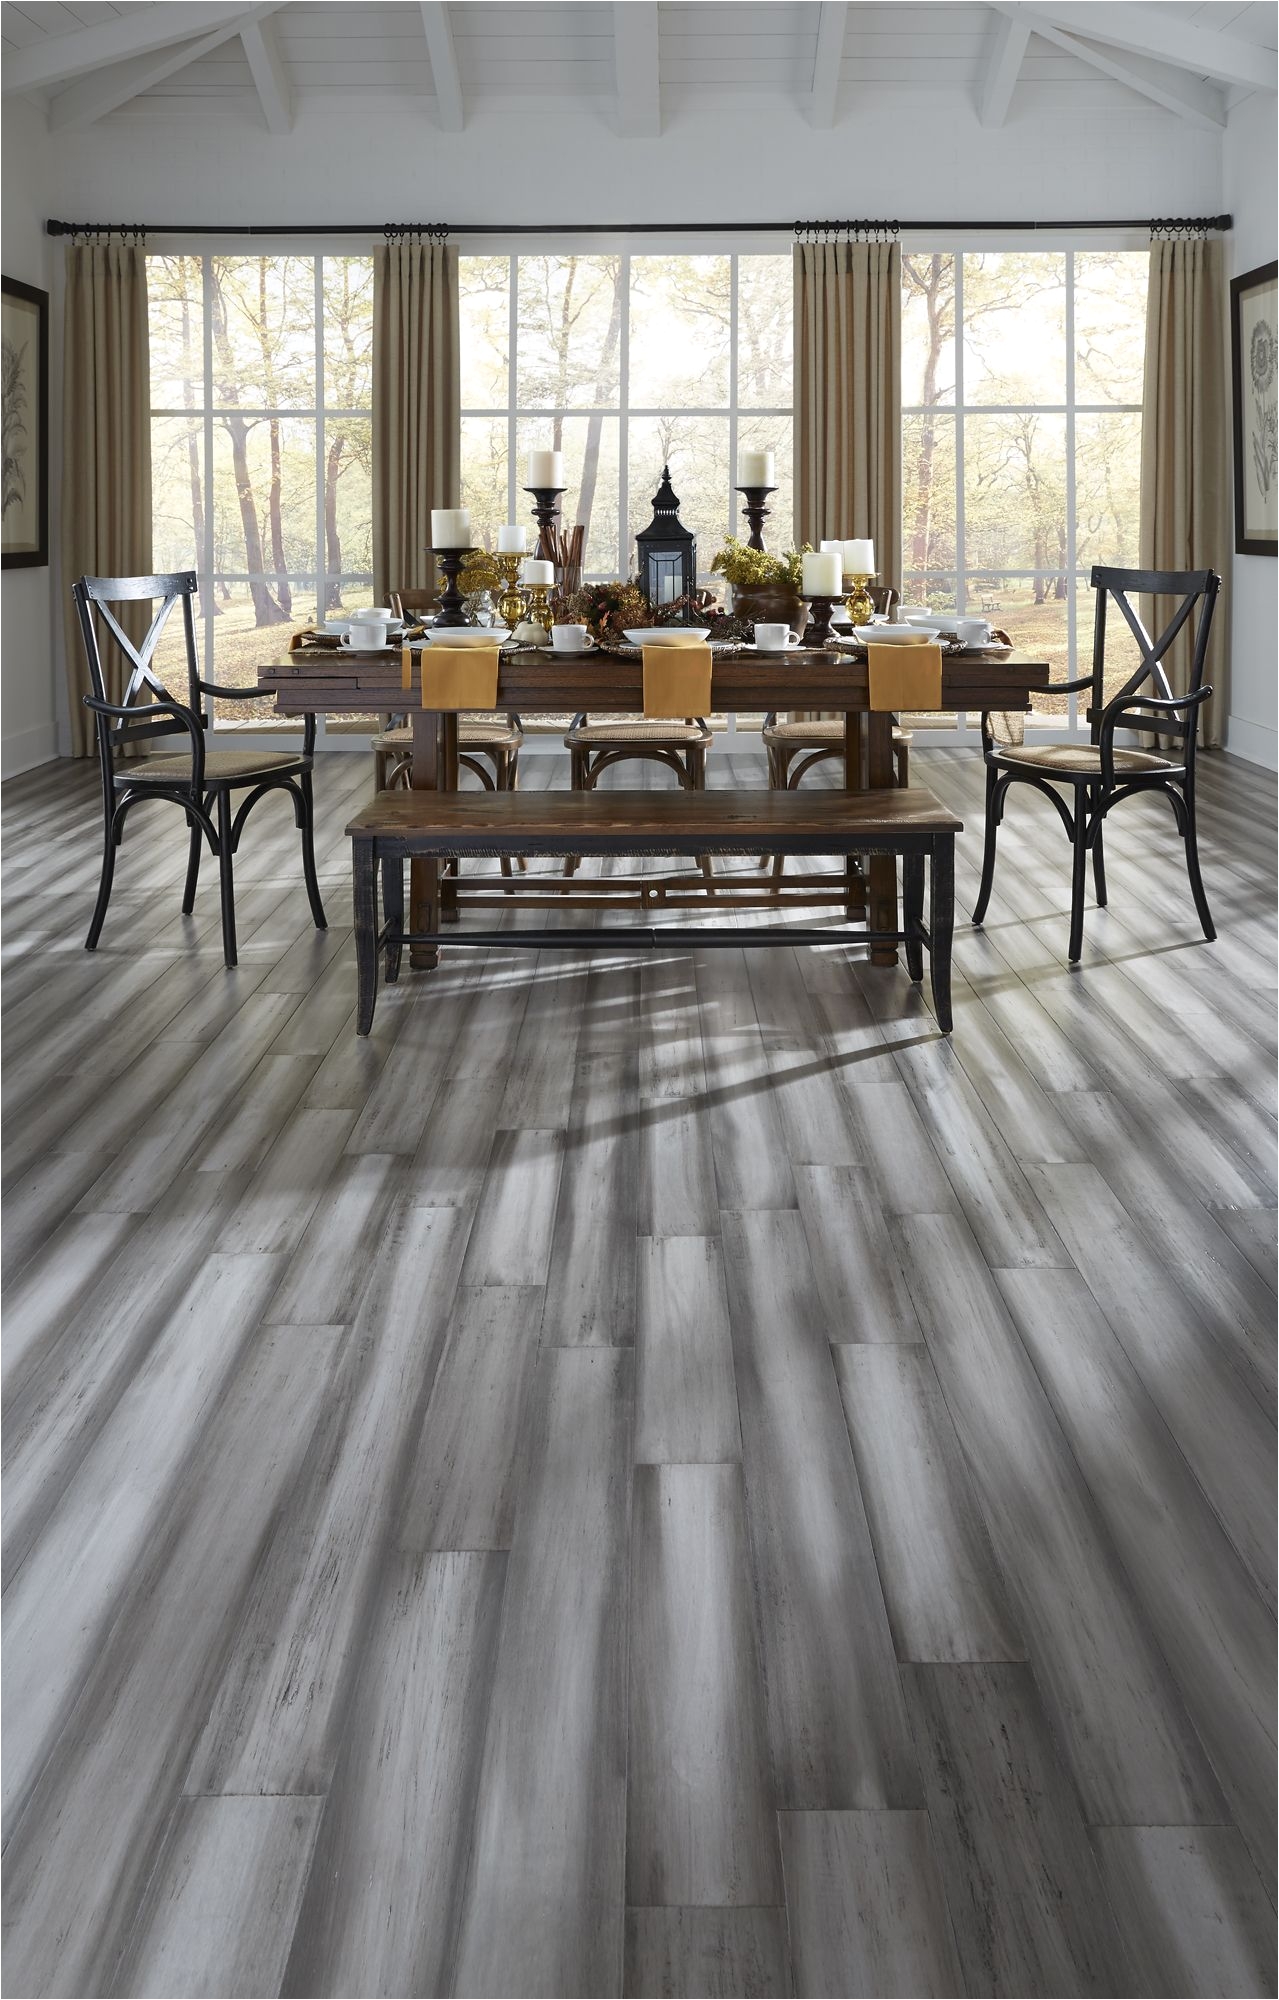 pair perfectly with the stately blend of light and dark gray shades to offer instant charm in silver stone distressed bamboo this hand painted floor